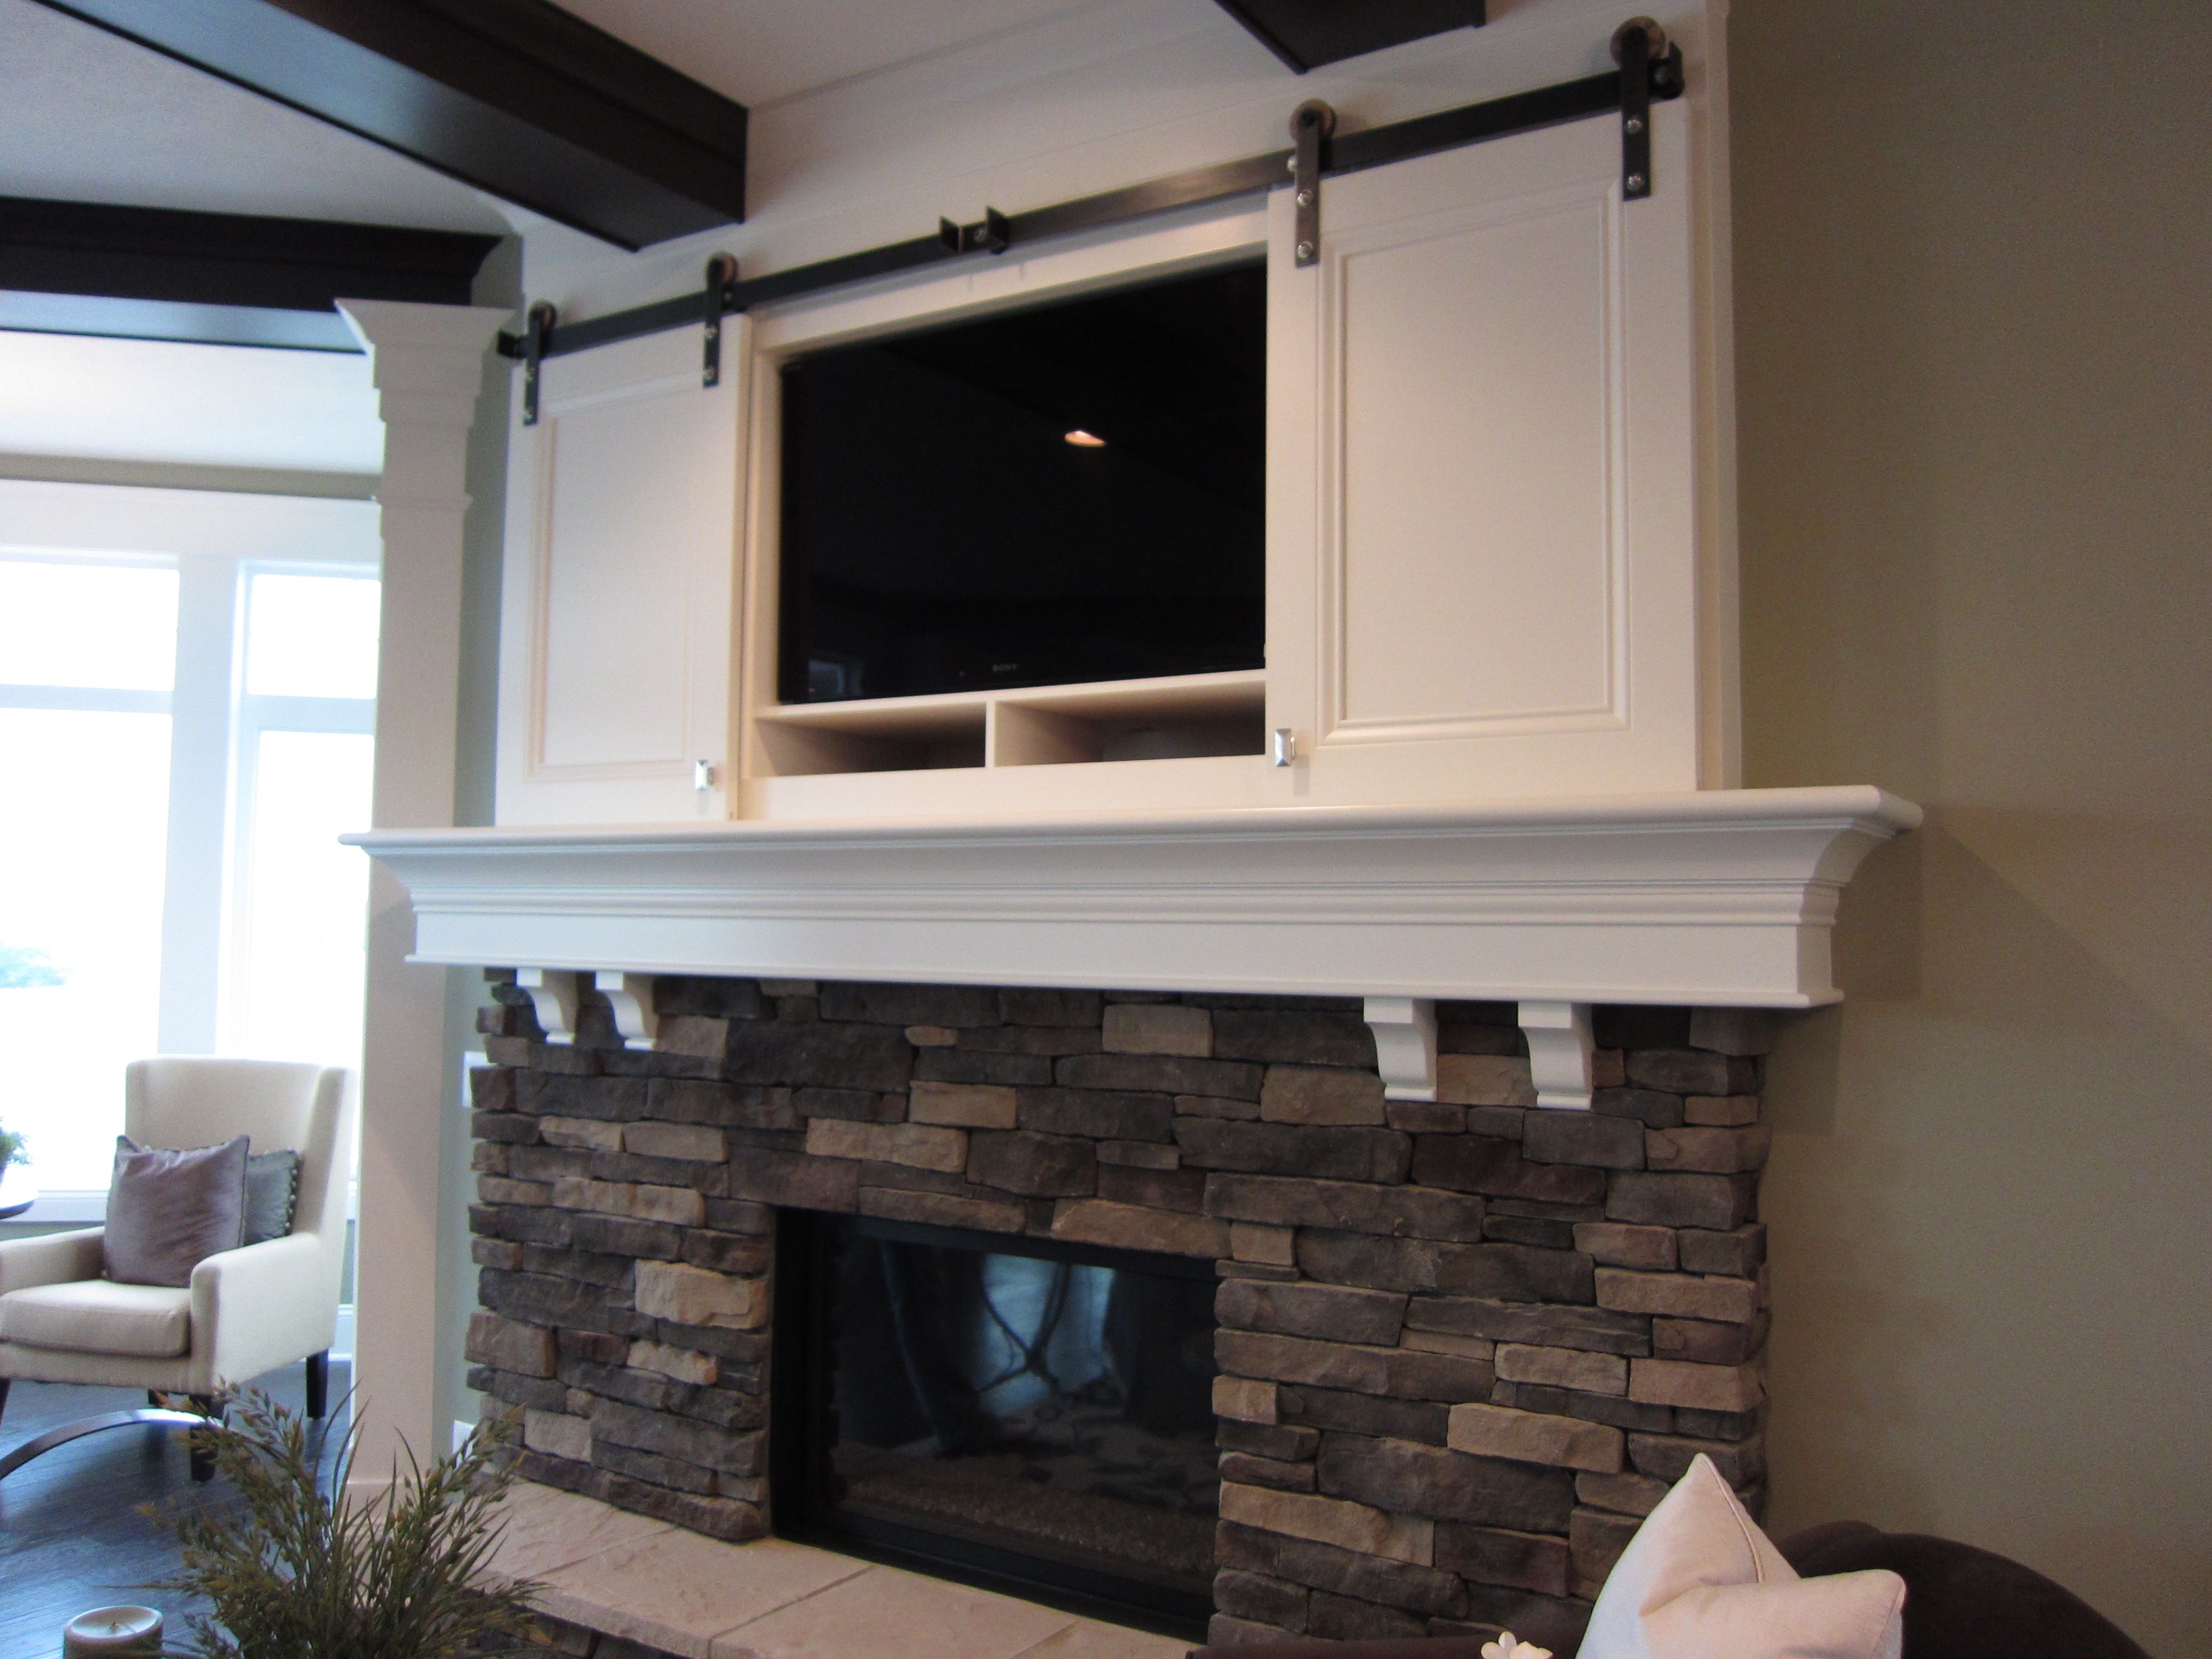 How to Install A Mantel On A Brick Fireplace Elegant Fireplace Tv Mantel Ideas Best 25 Tv Above Fireplace Ideas